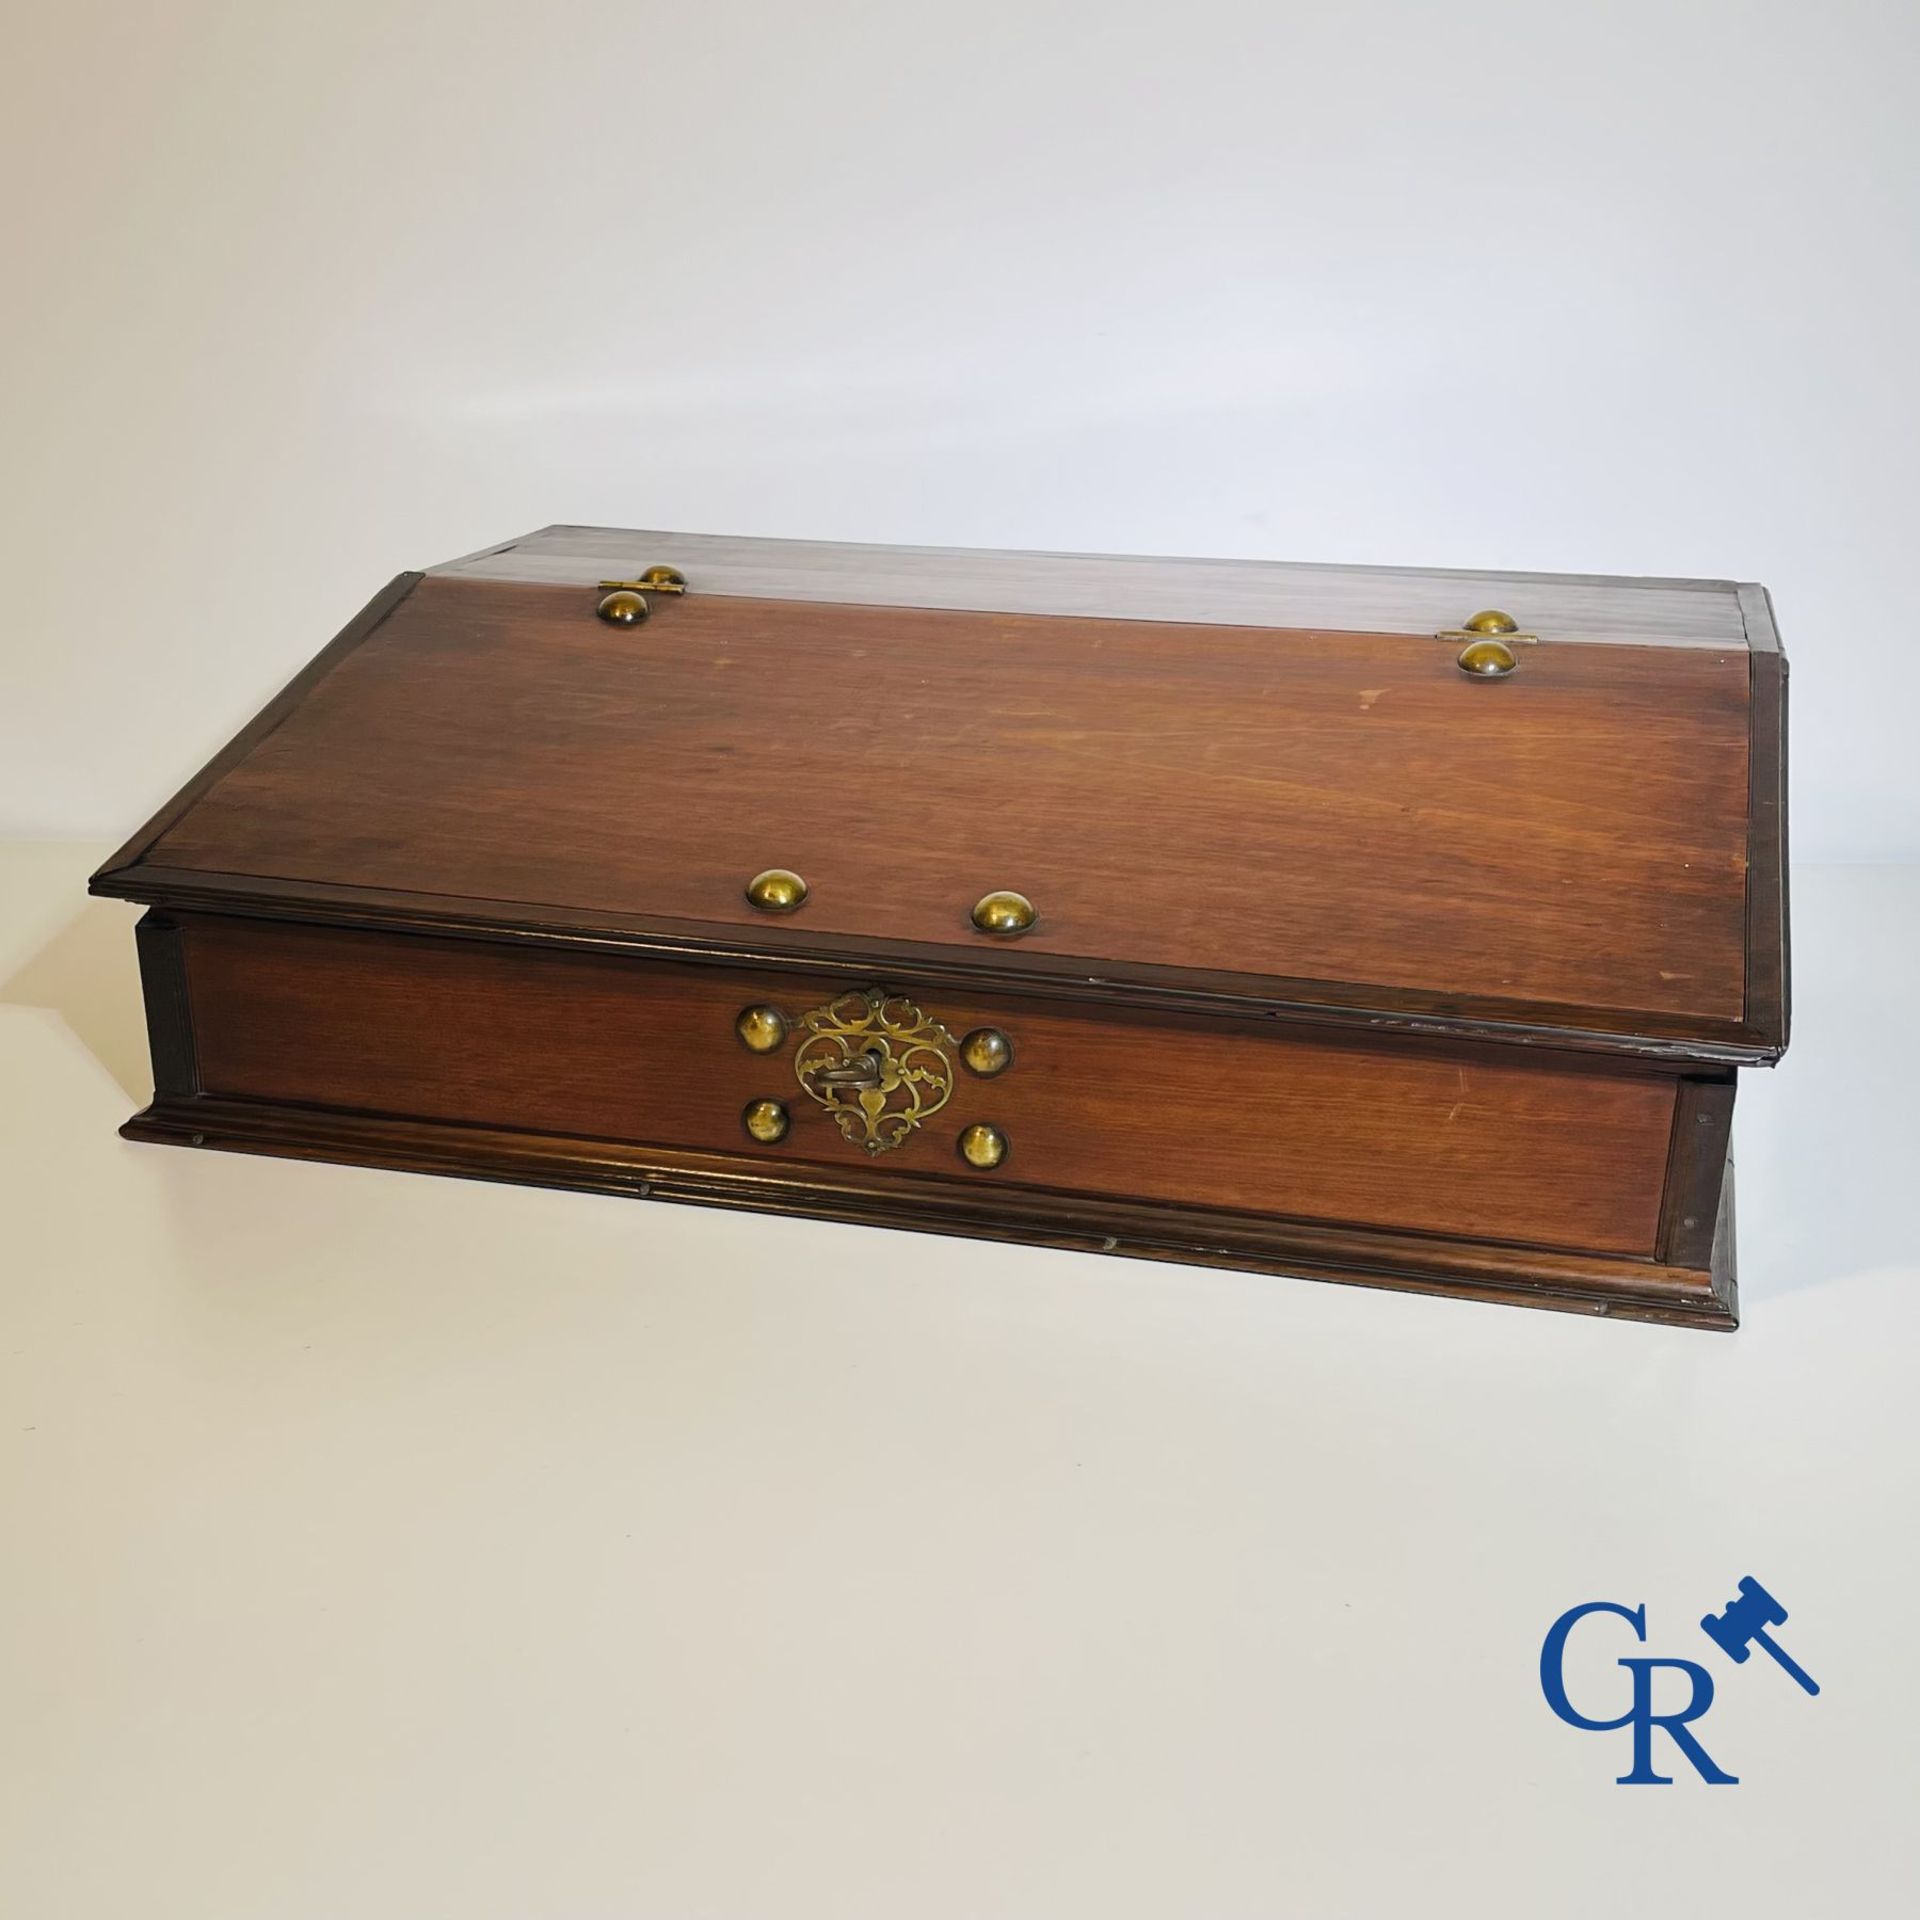 A large mahogany writing case with bronze fittings. Early 19th century. - Image 3 of 6